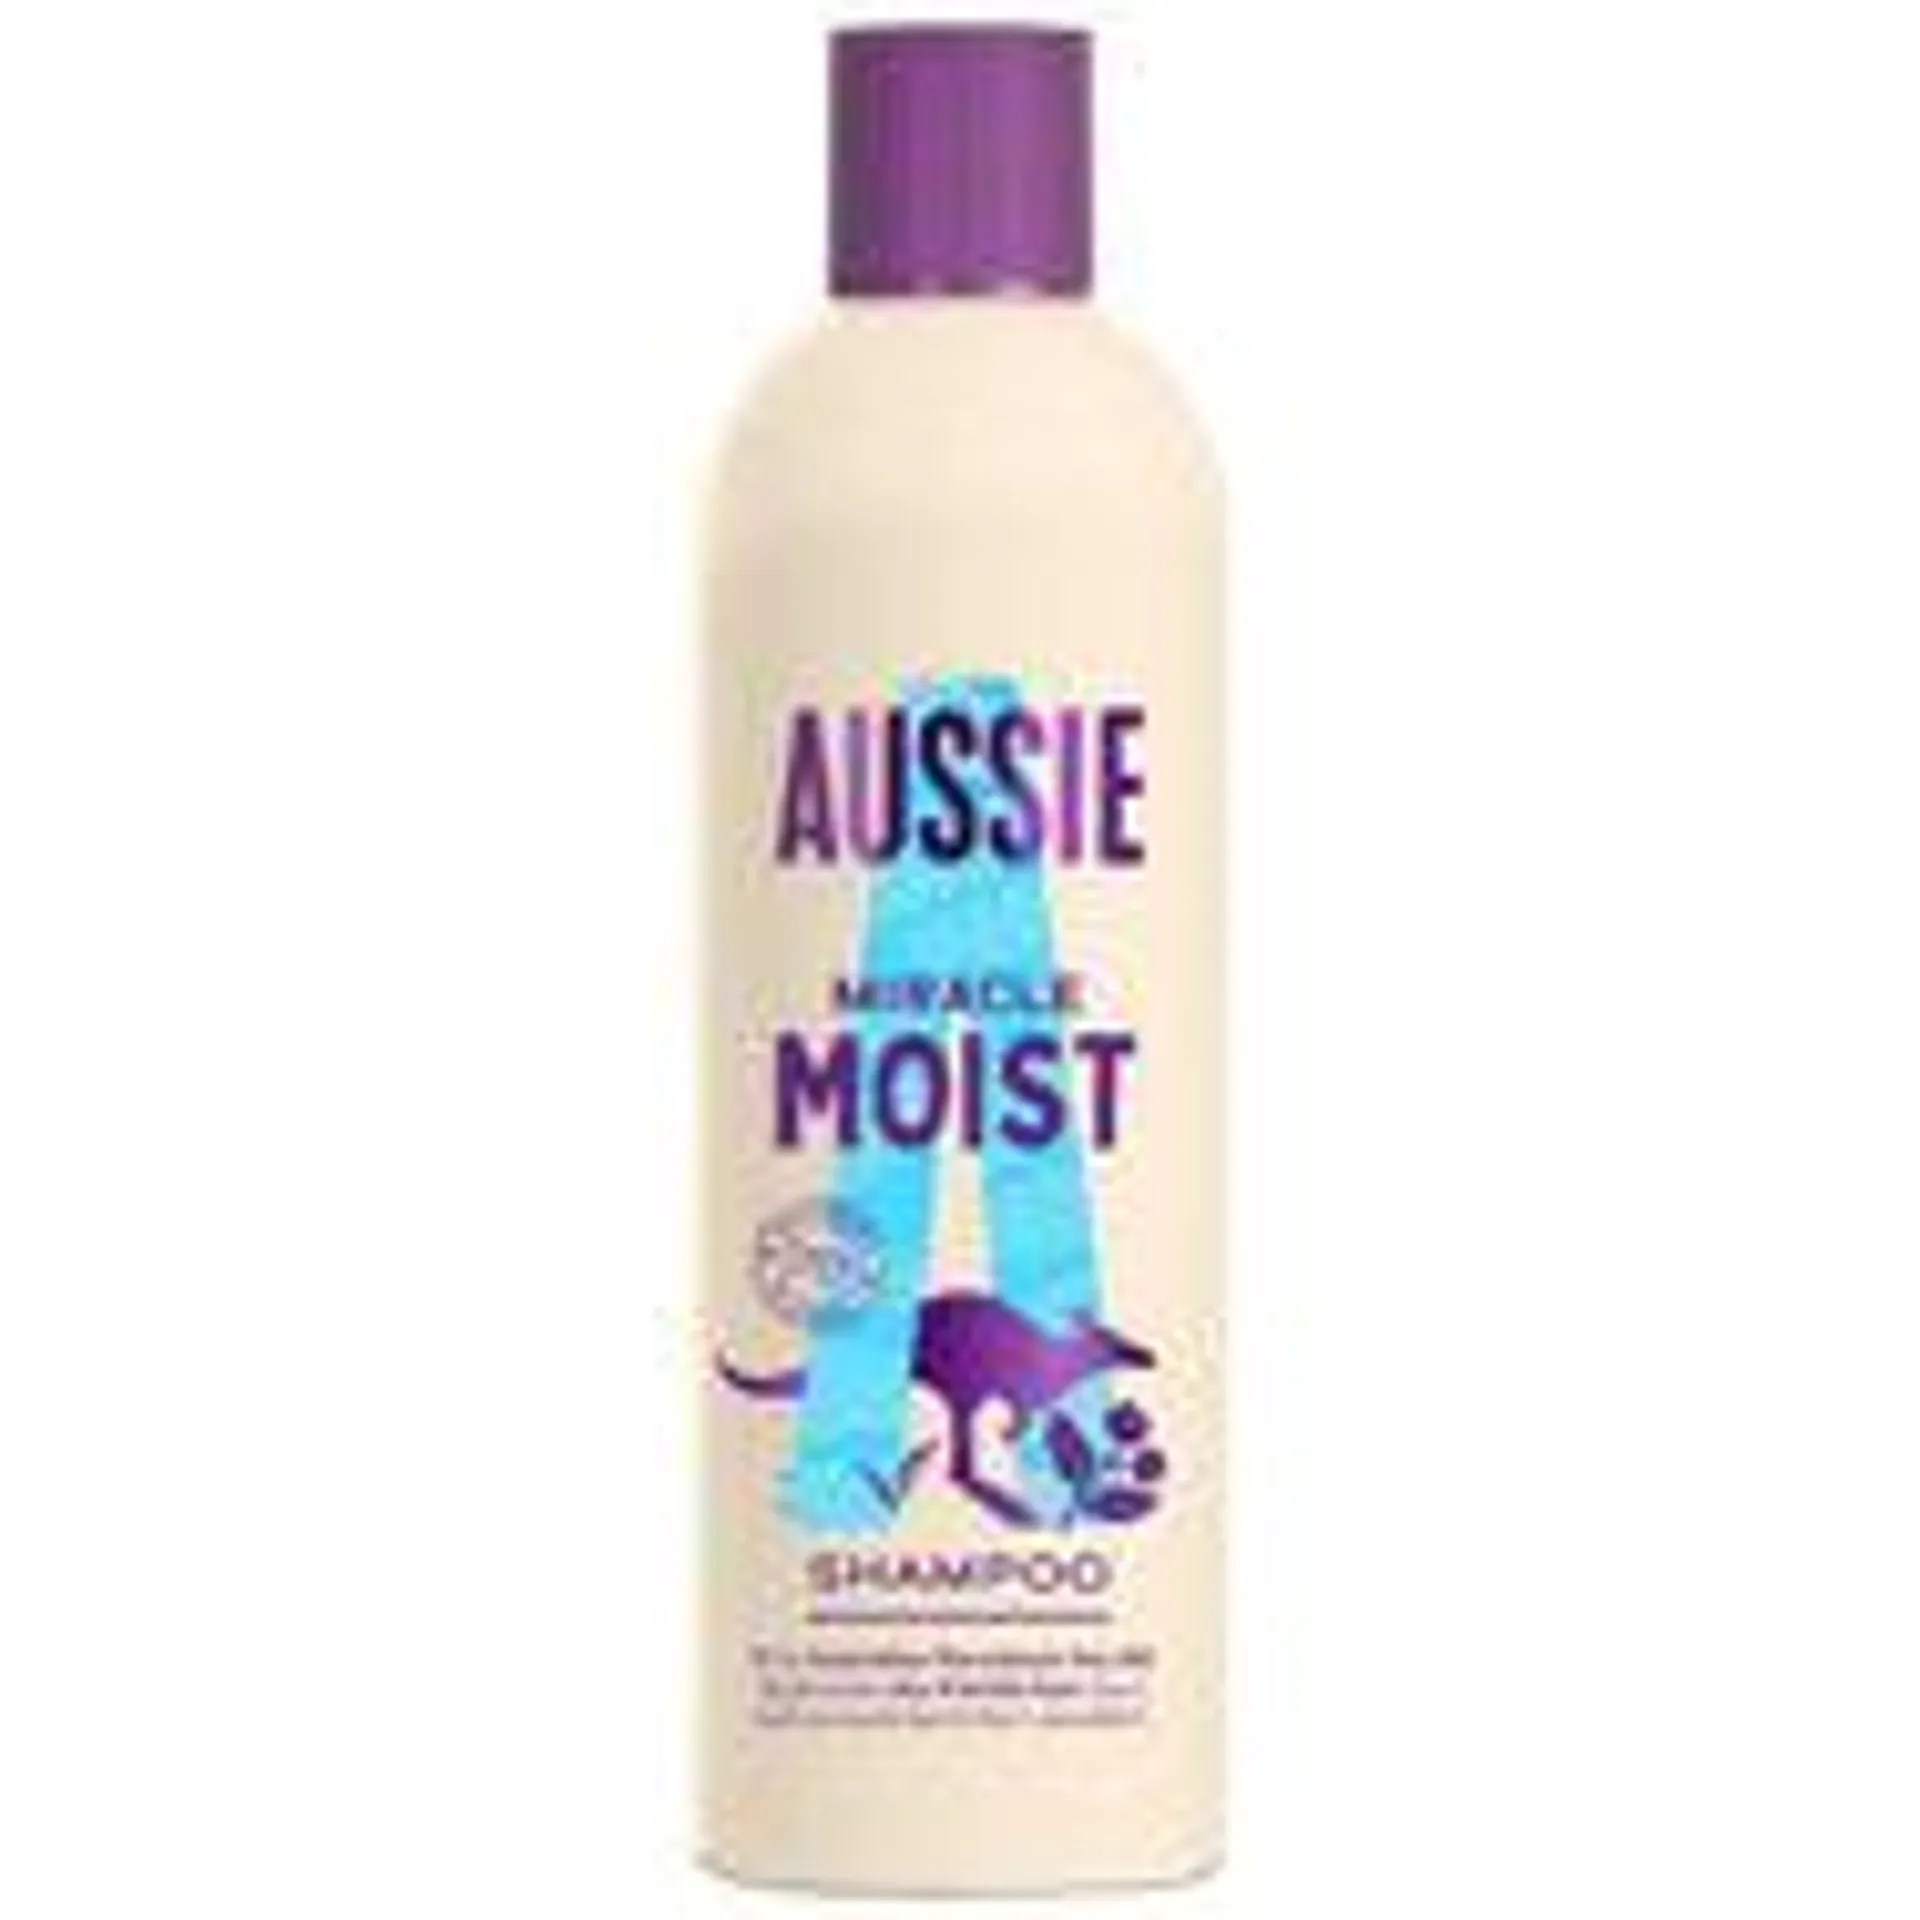 Aussie Shampoo Miracle Moist For Dry and Frizzy Hair